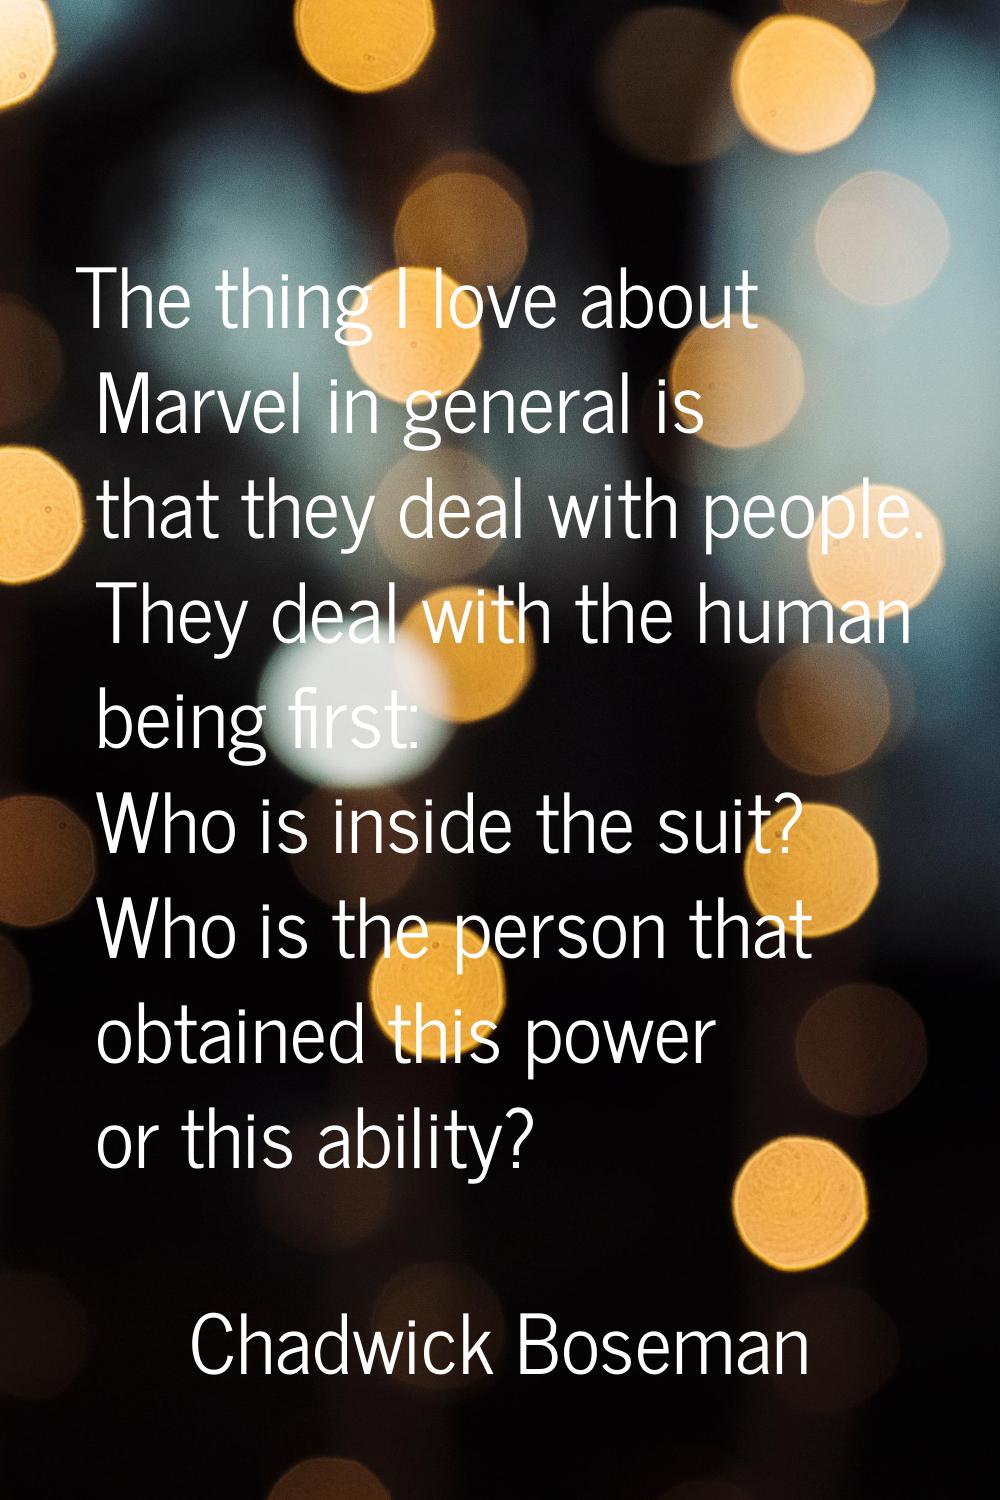 The thing I love about Marvel in general is that they deal with people. They deal with the human be